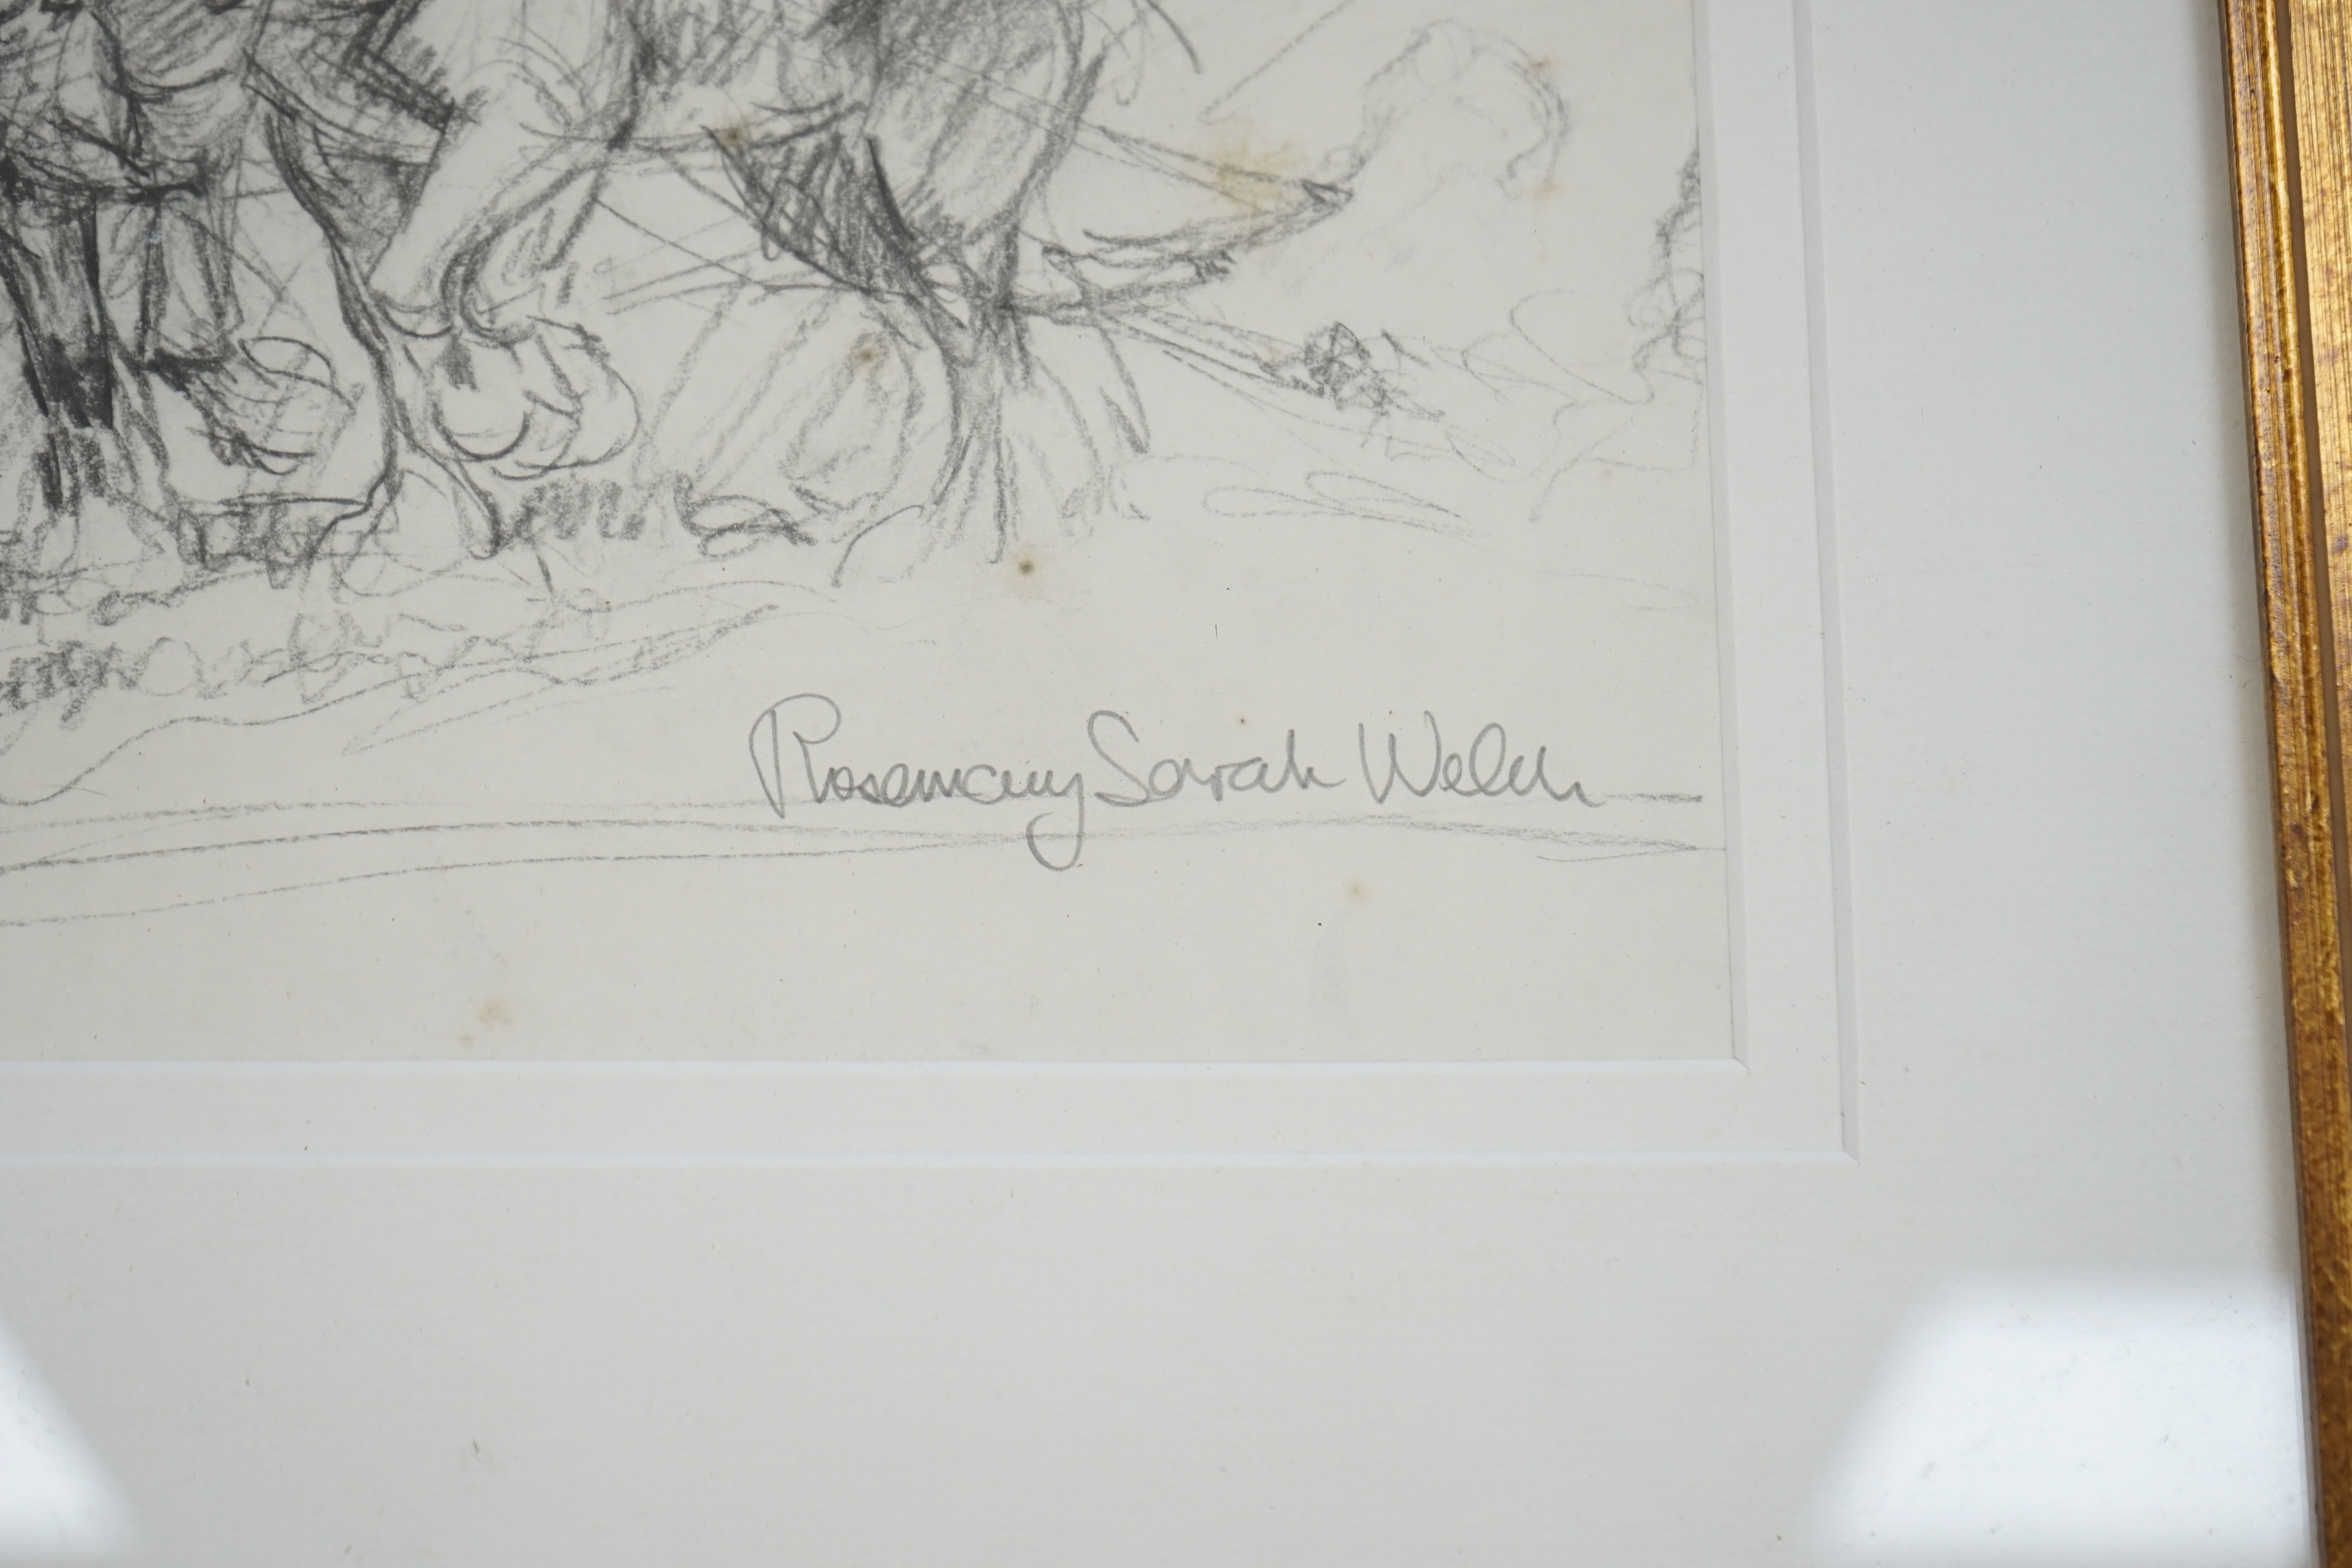 Rosemary Sarah Welch (b.1946), pencil sketch, Study of work horses ploughing, signed, 20 x 27cm. Condition - poor to fair